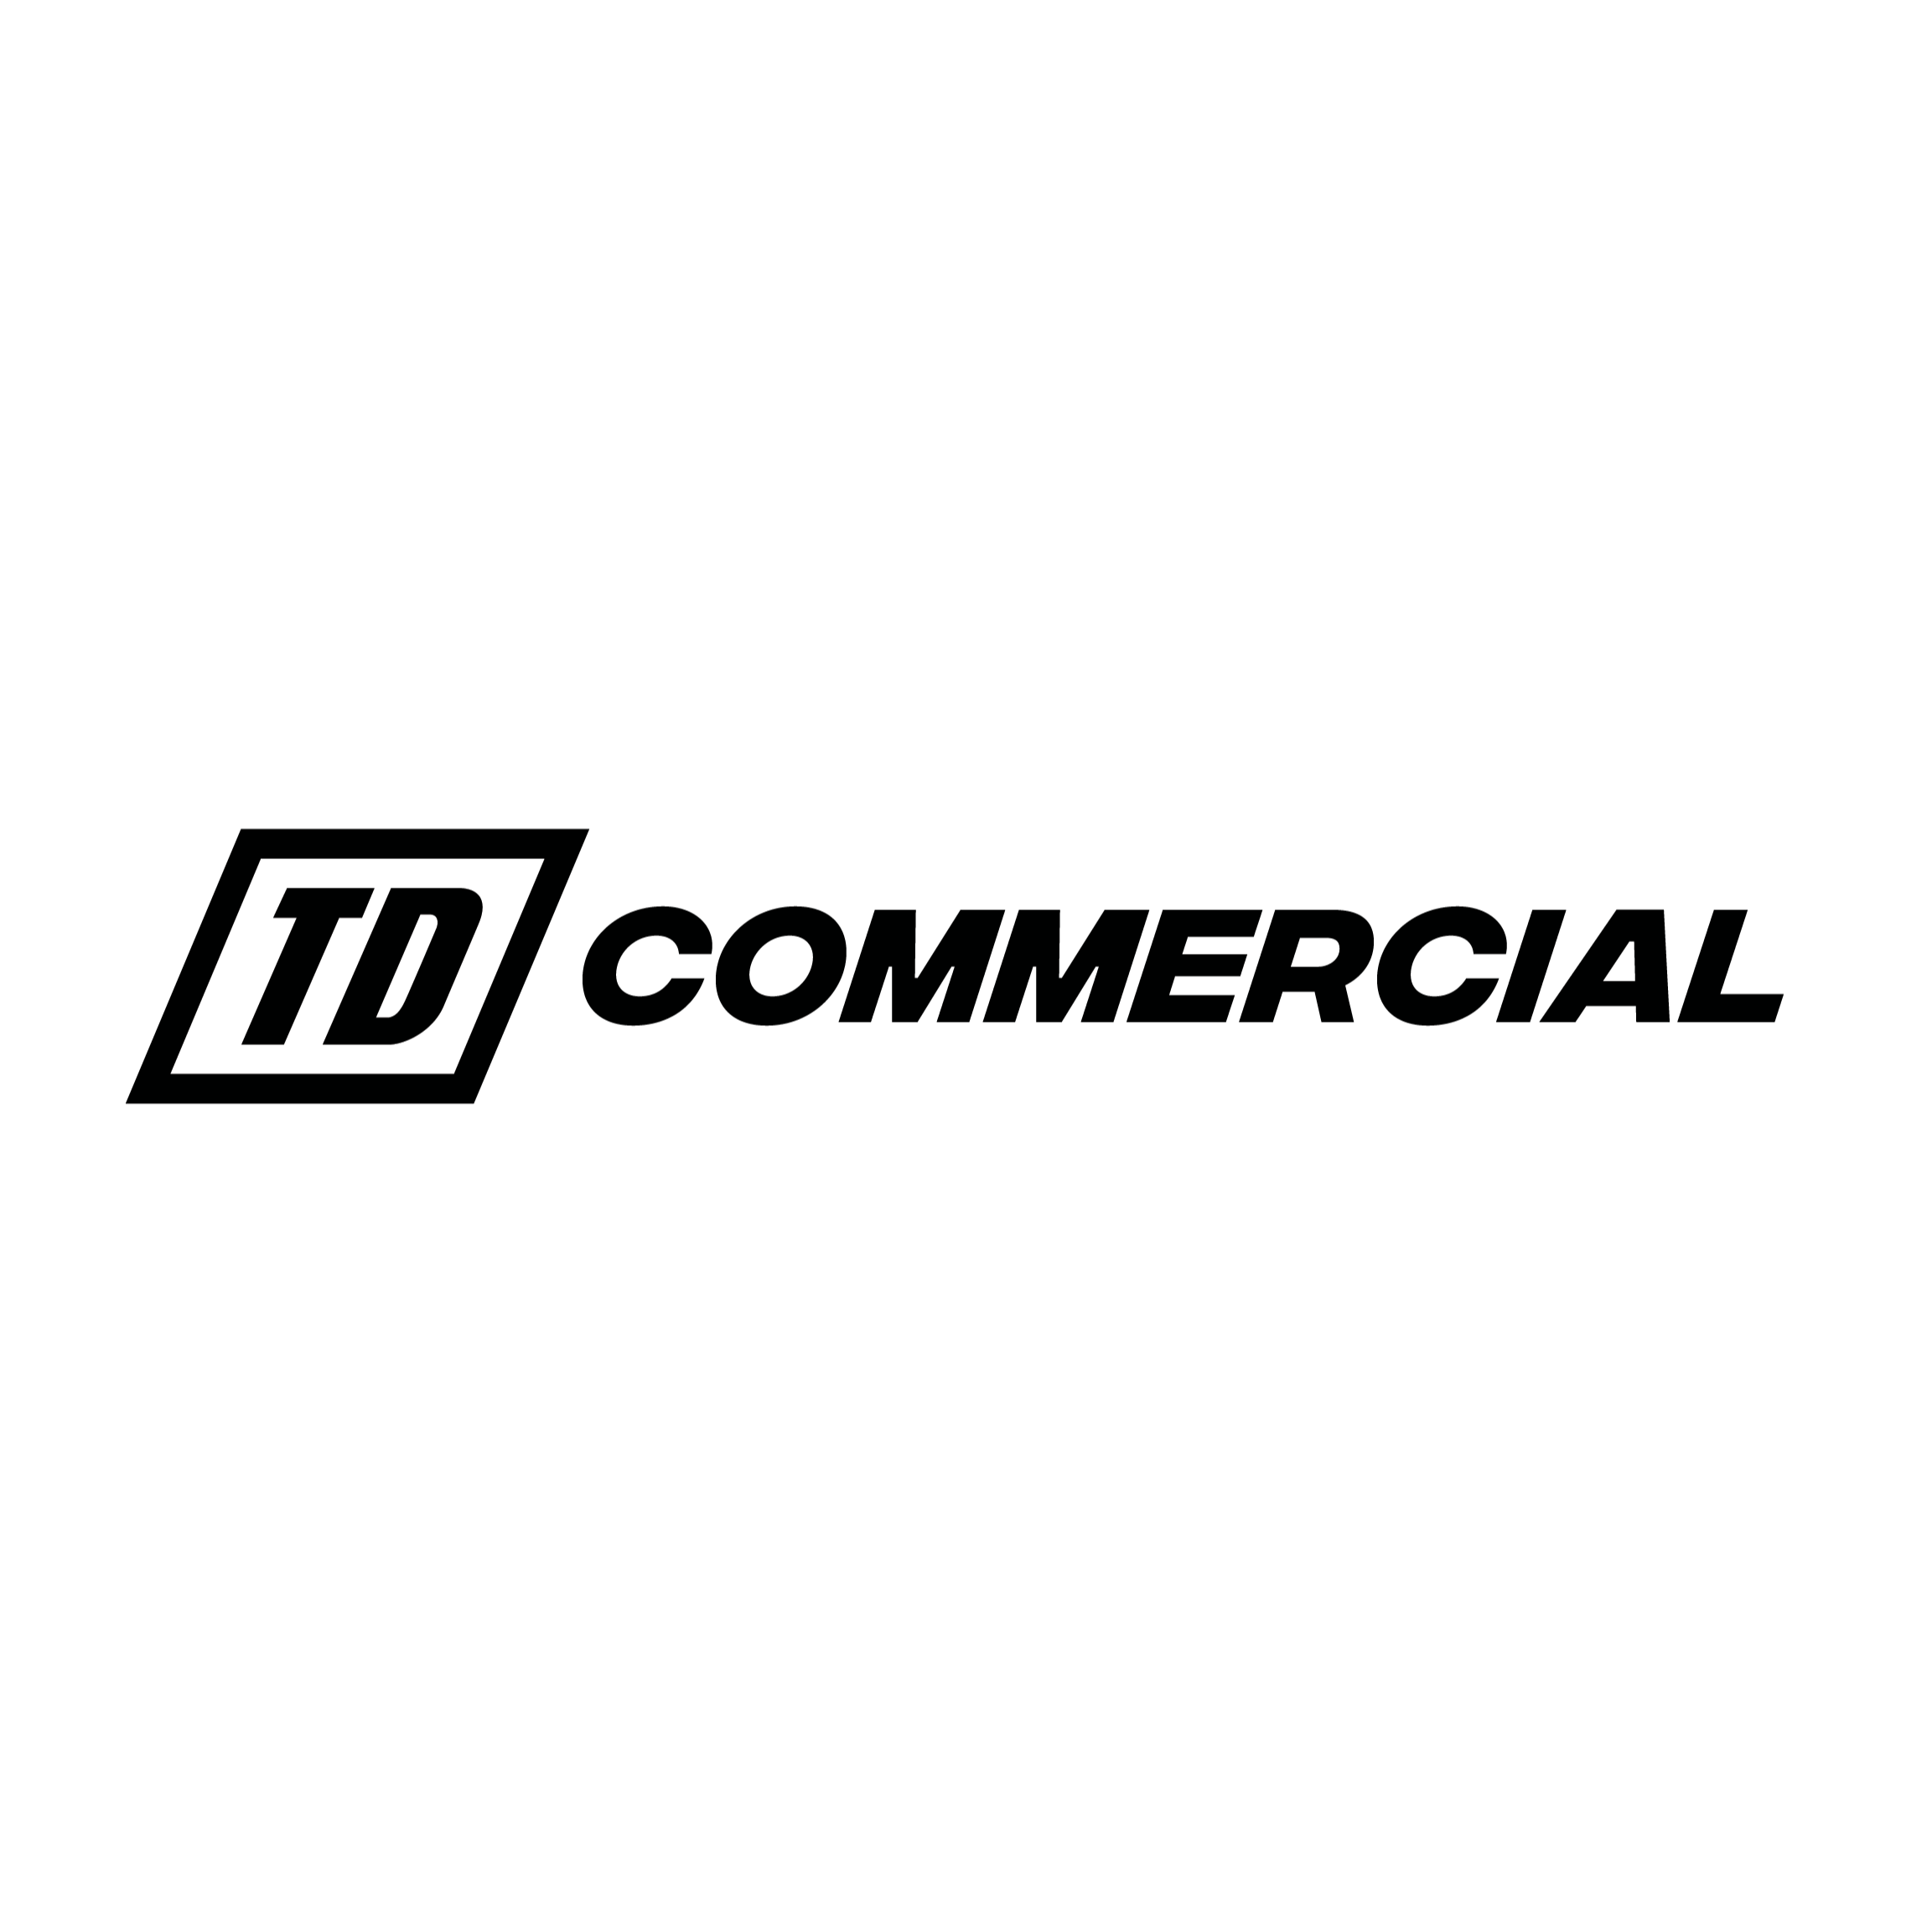 TD Commercial